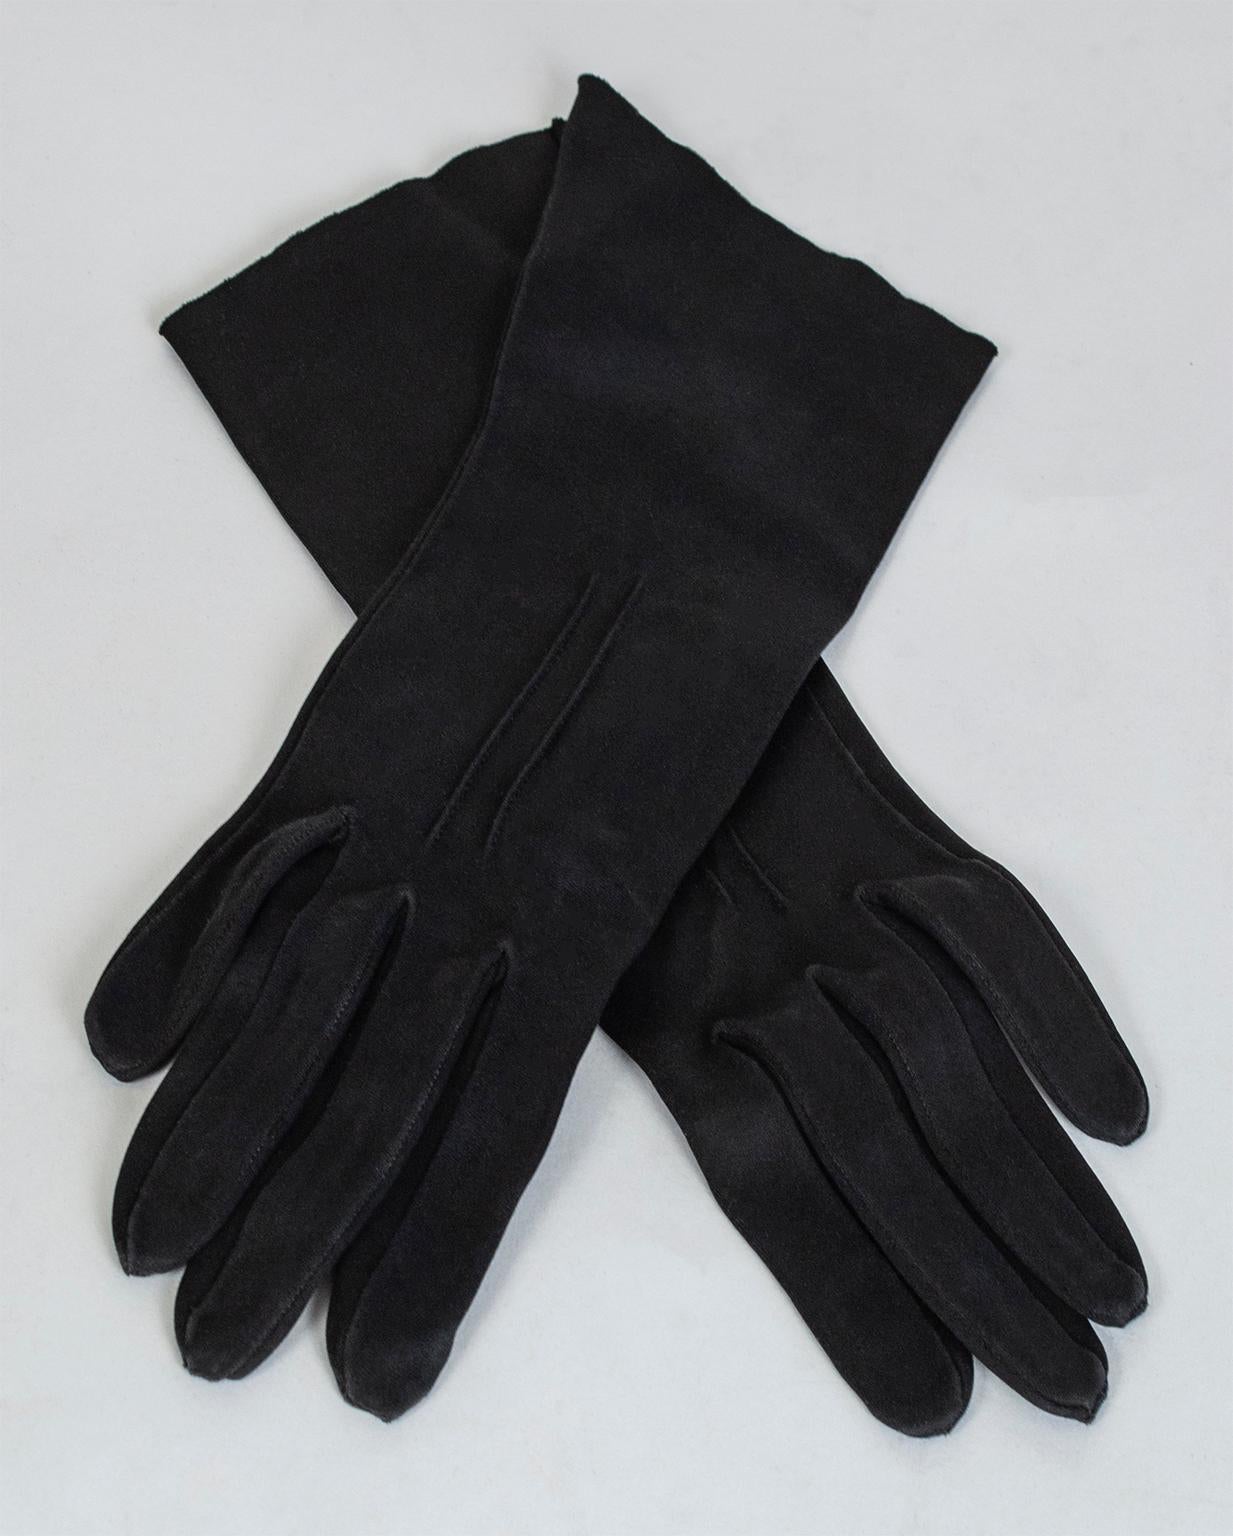 An easy way to elevate the sophistication of any outfit, the right gloves can be both functional and beautiful. In jet black cotton doeskin, this pair features two points atop each hand and flares slightly at the mid-forearm, making them ideal for